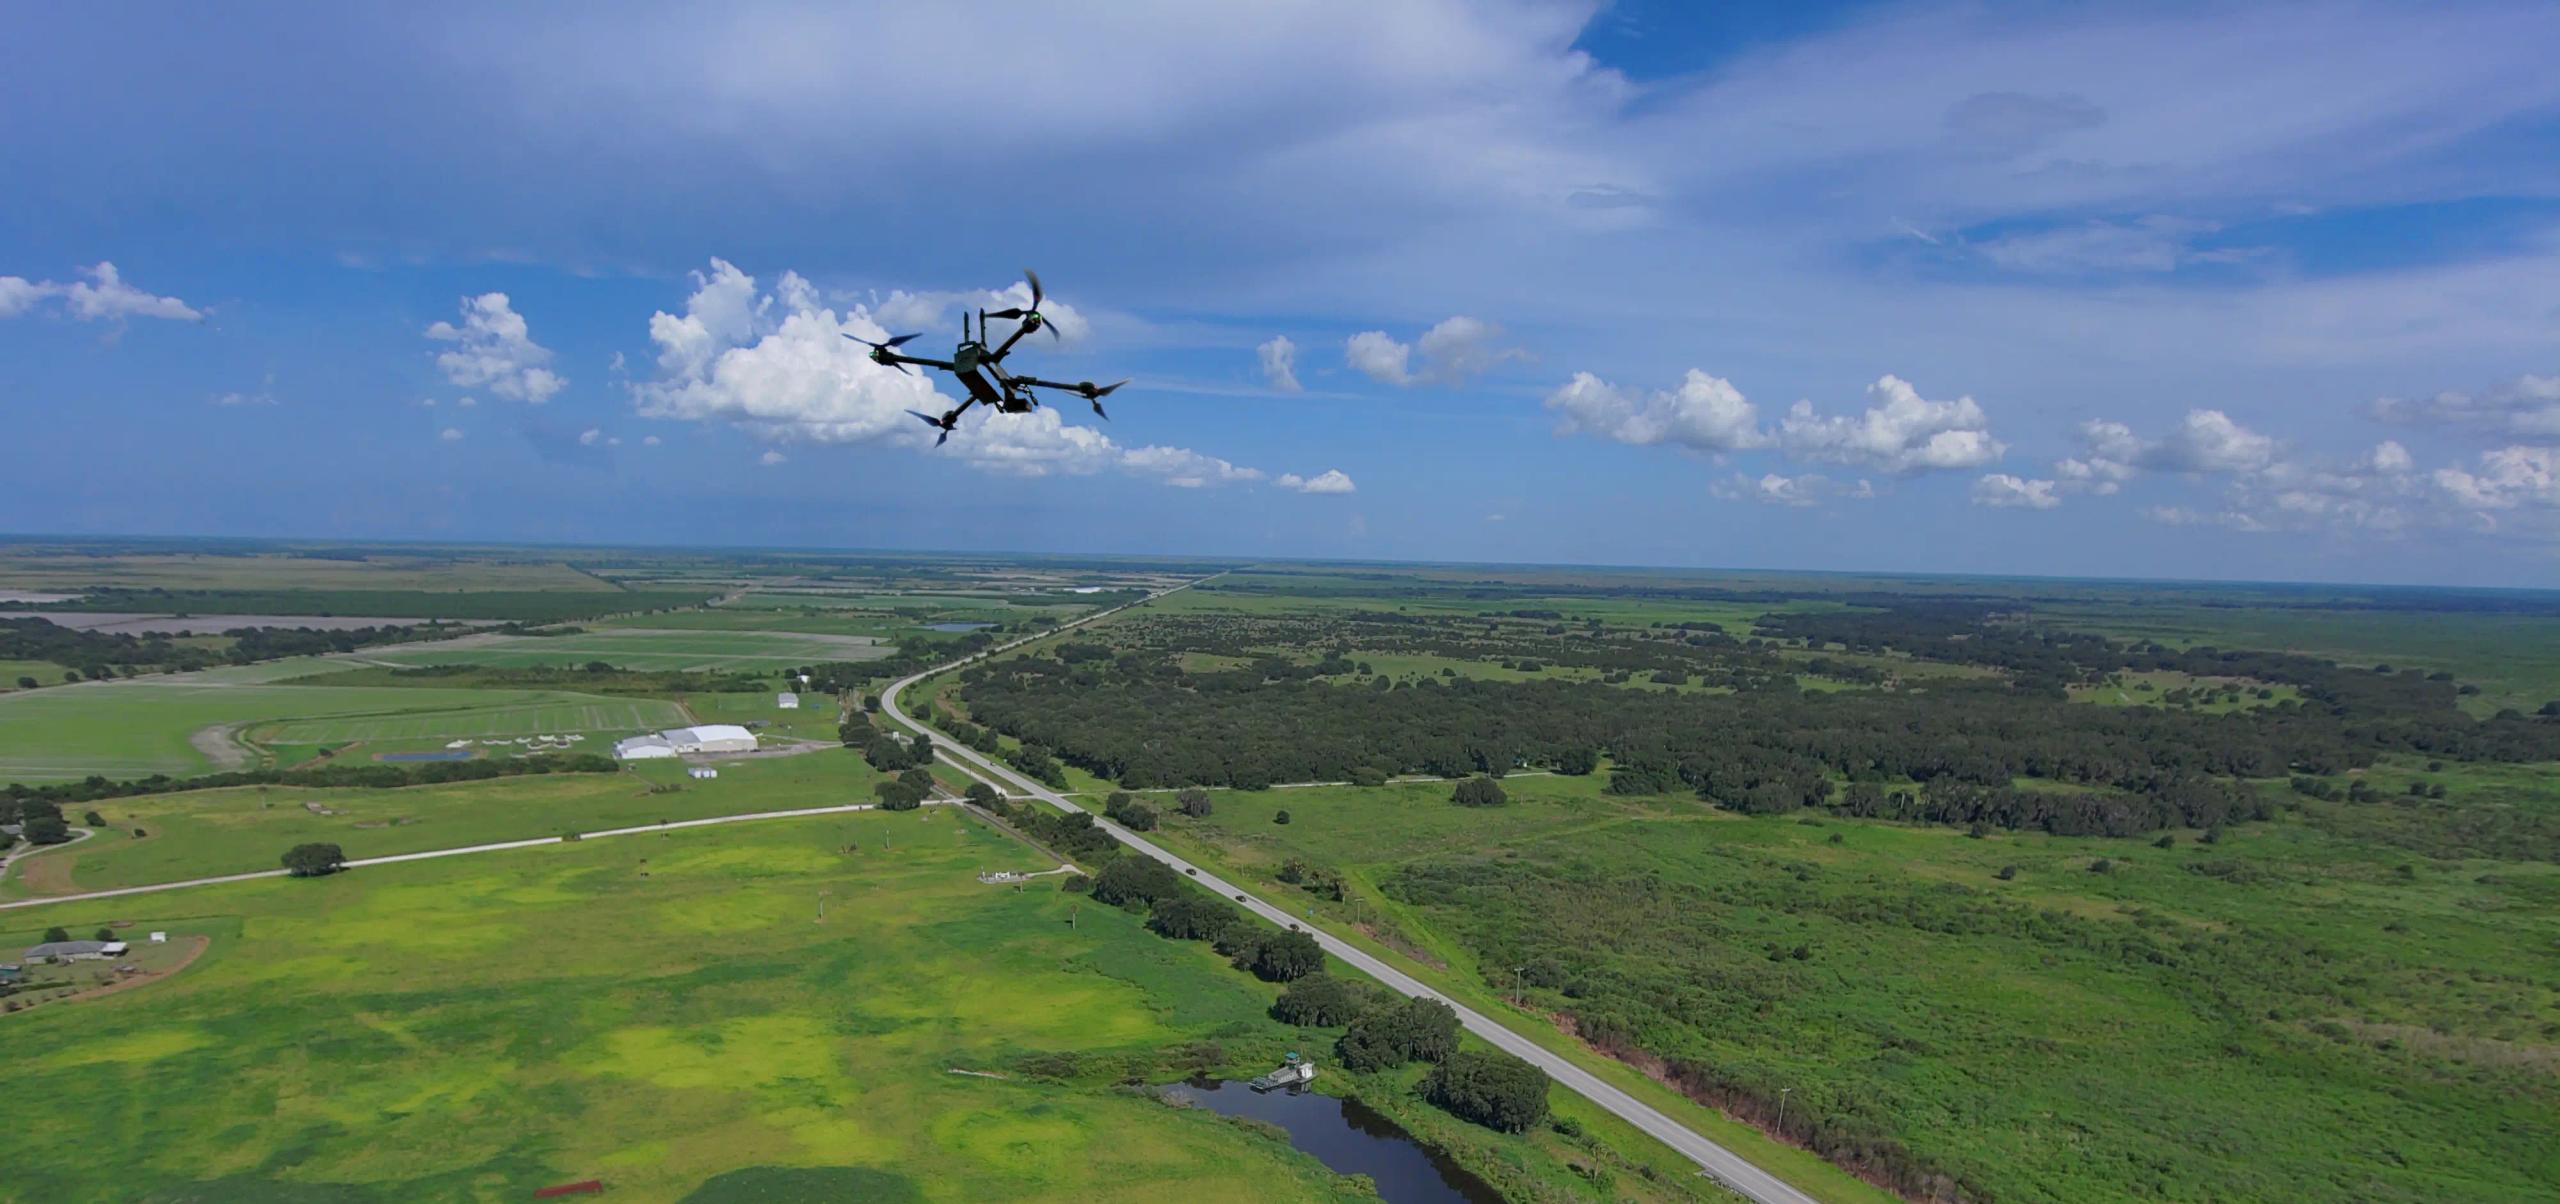 Drone in flight over rural stretch of highway landscape view